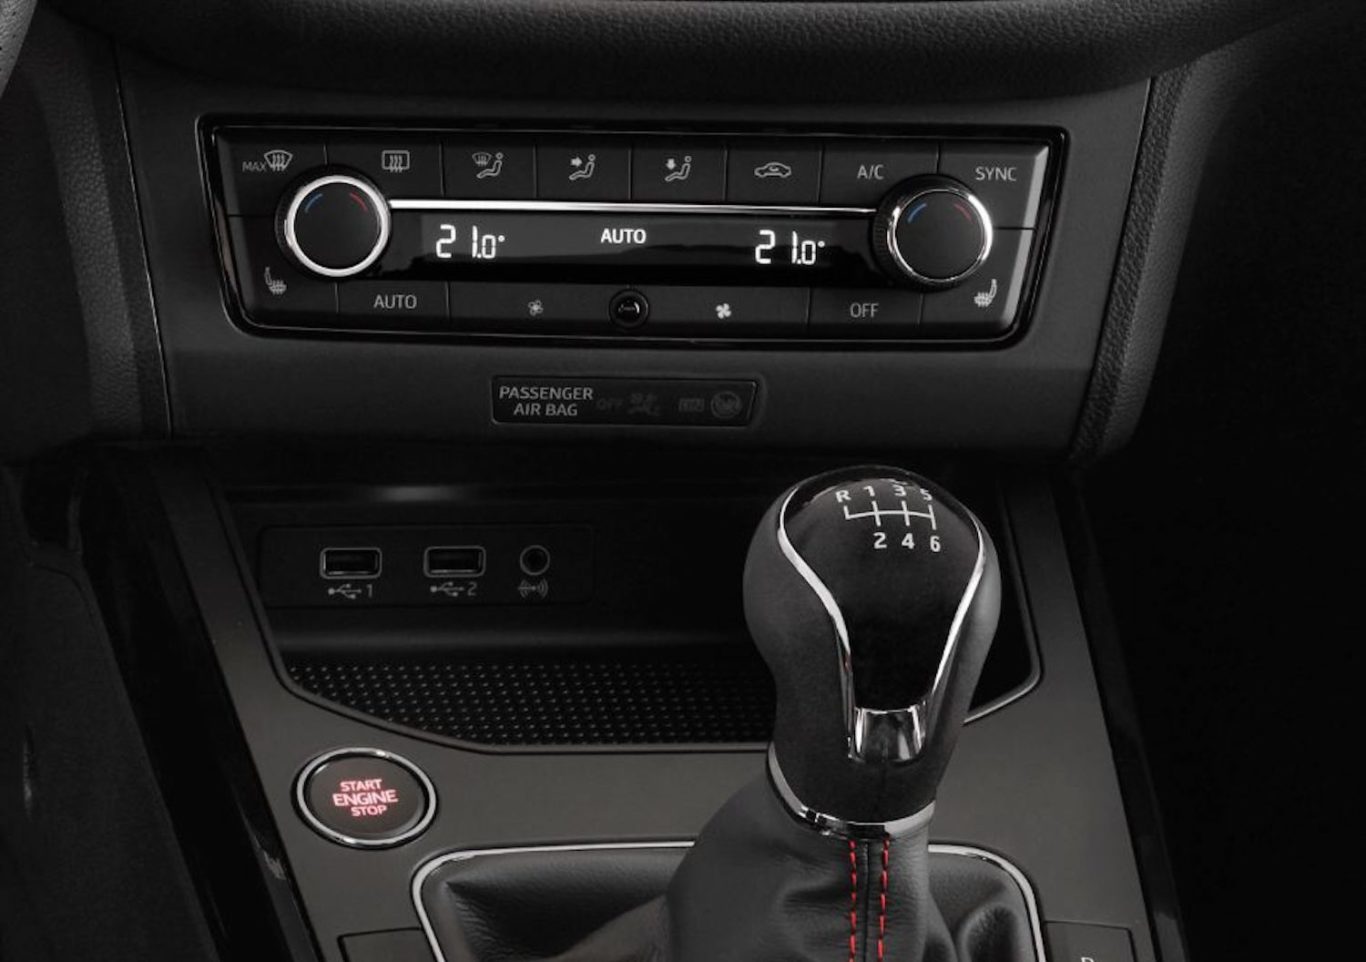 Many cars now come with complex heating systems